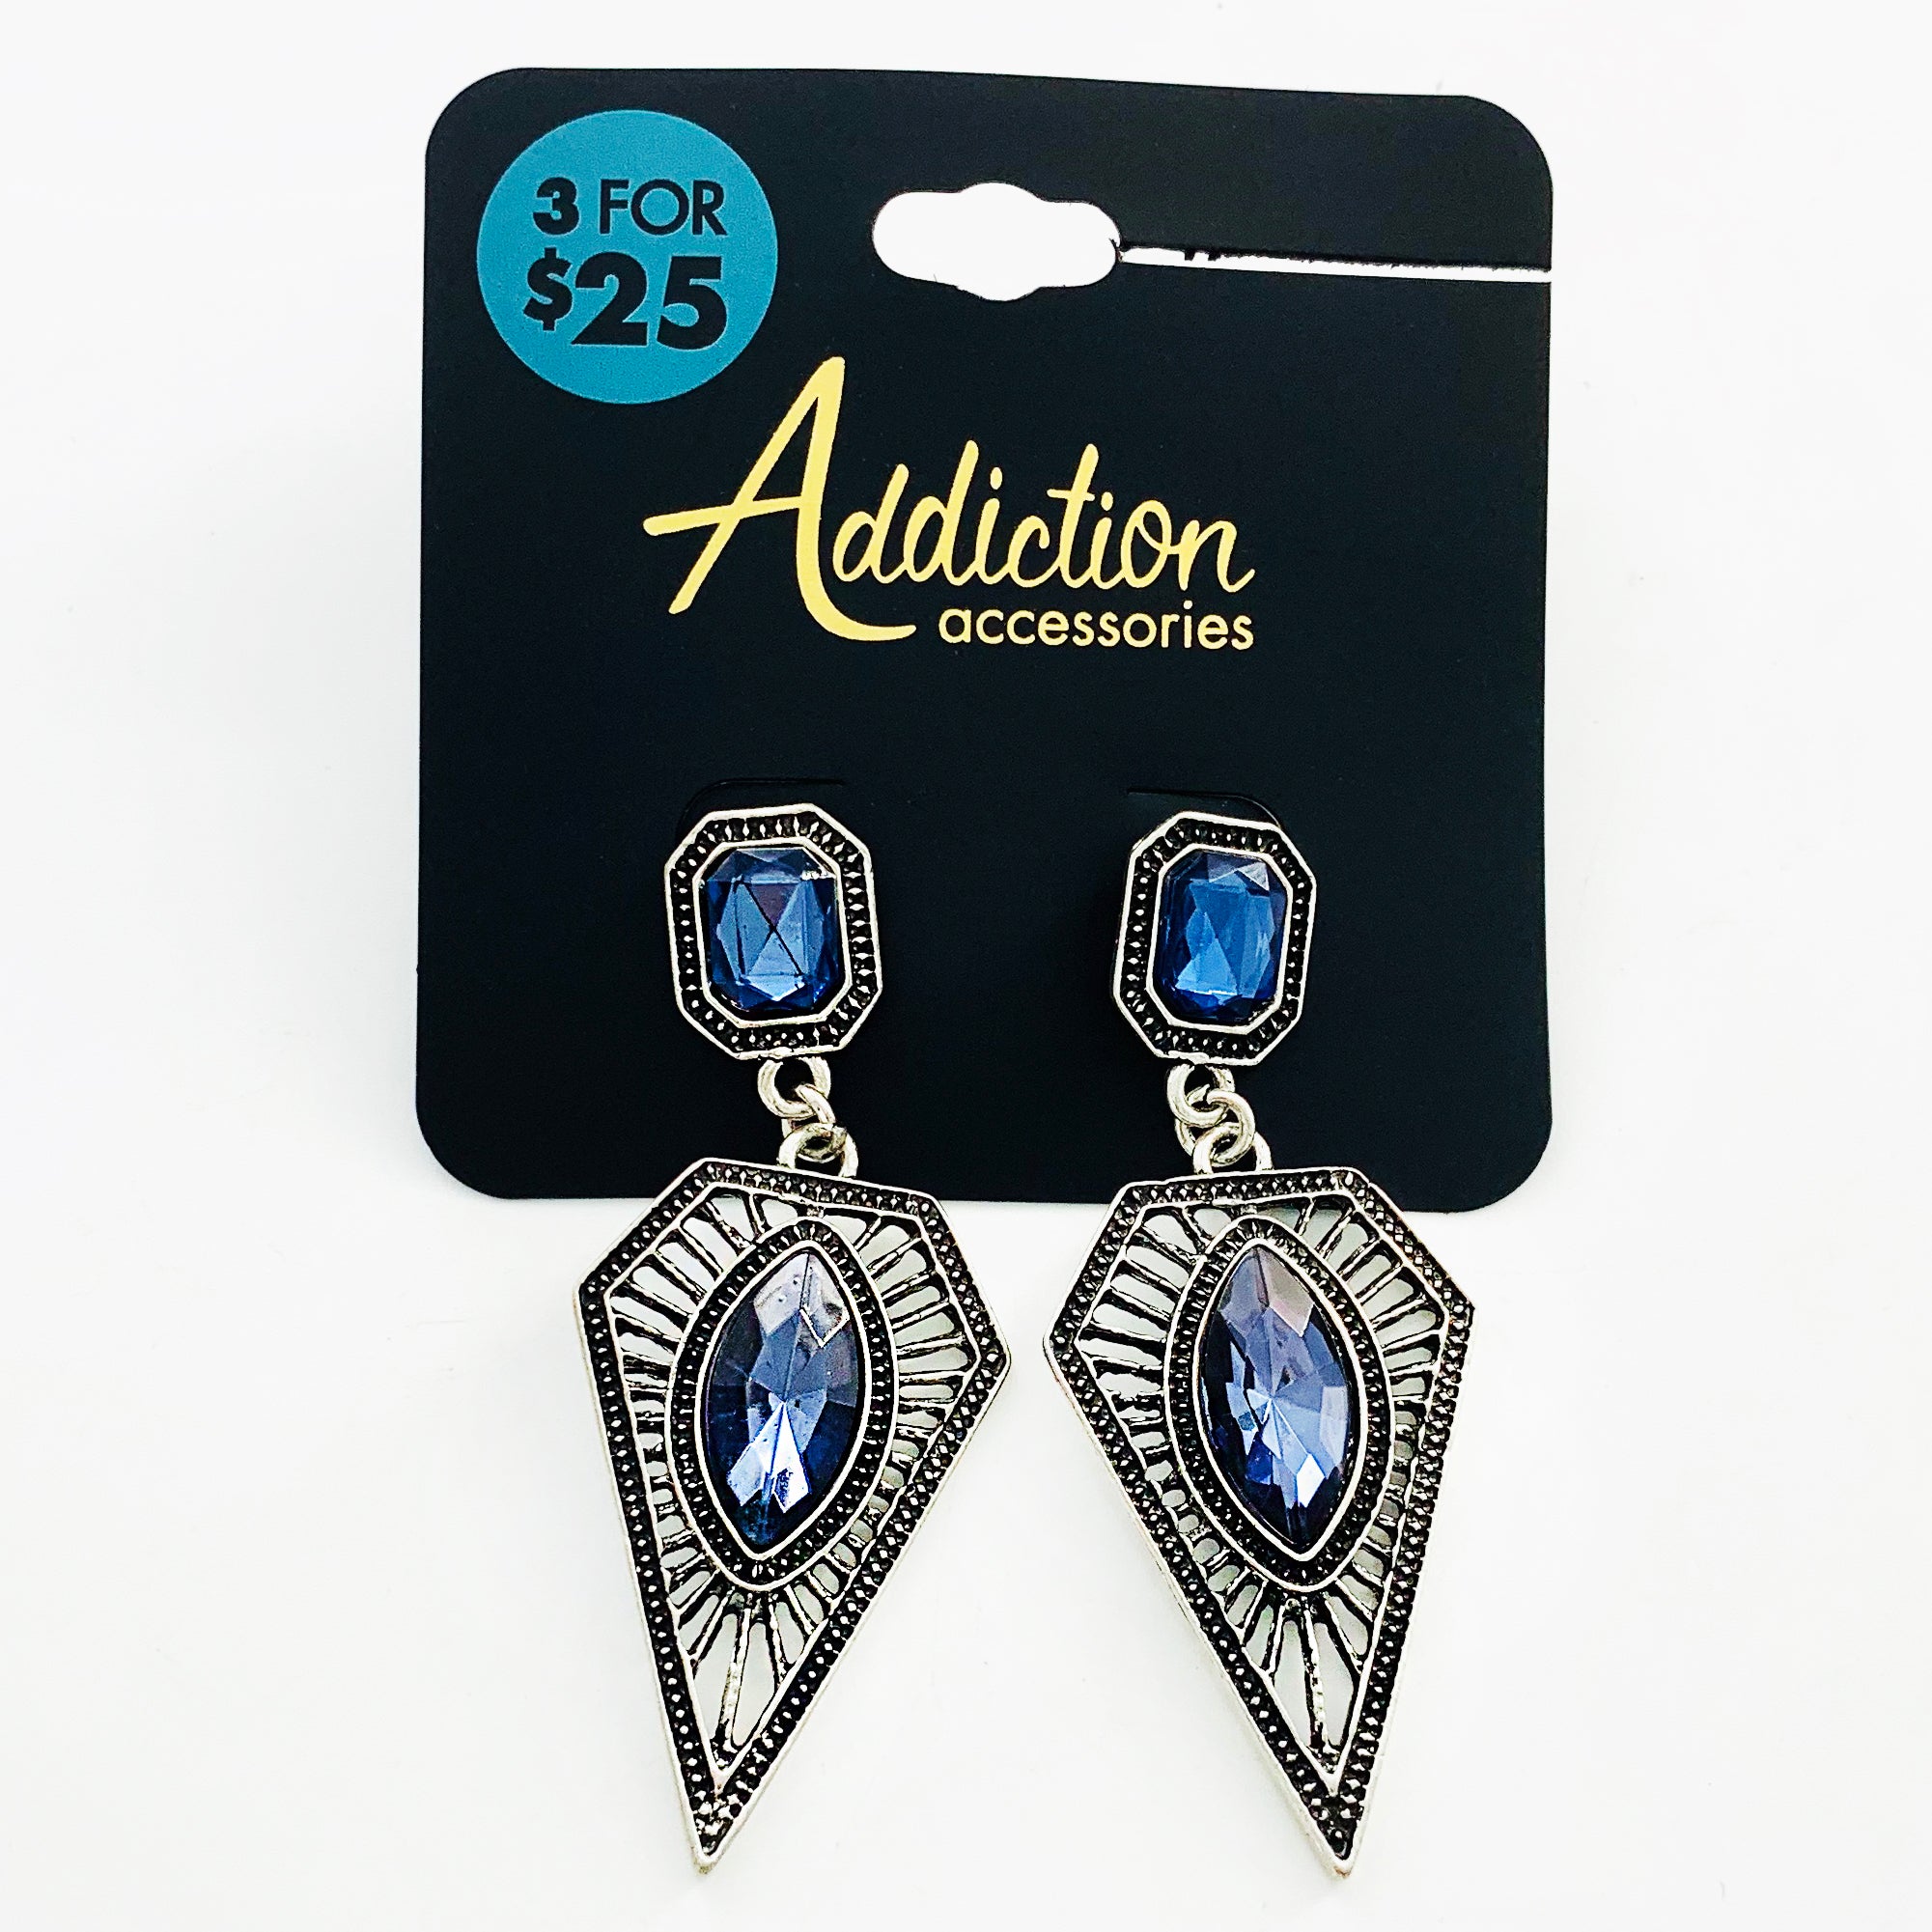 Art-deco inspired rustic silver earrings with blue gems